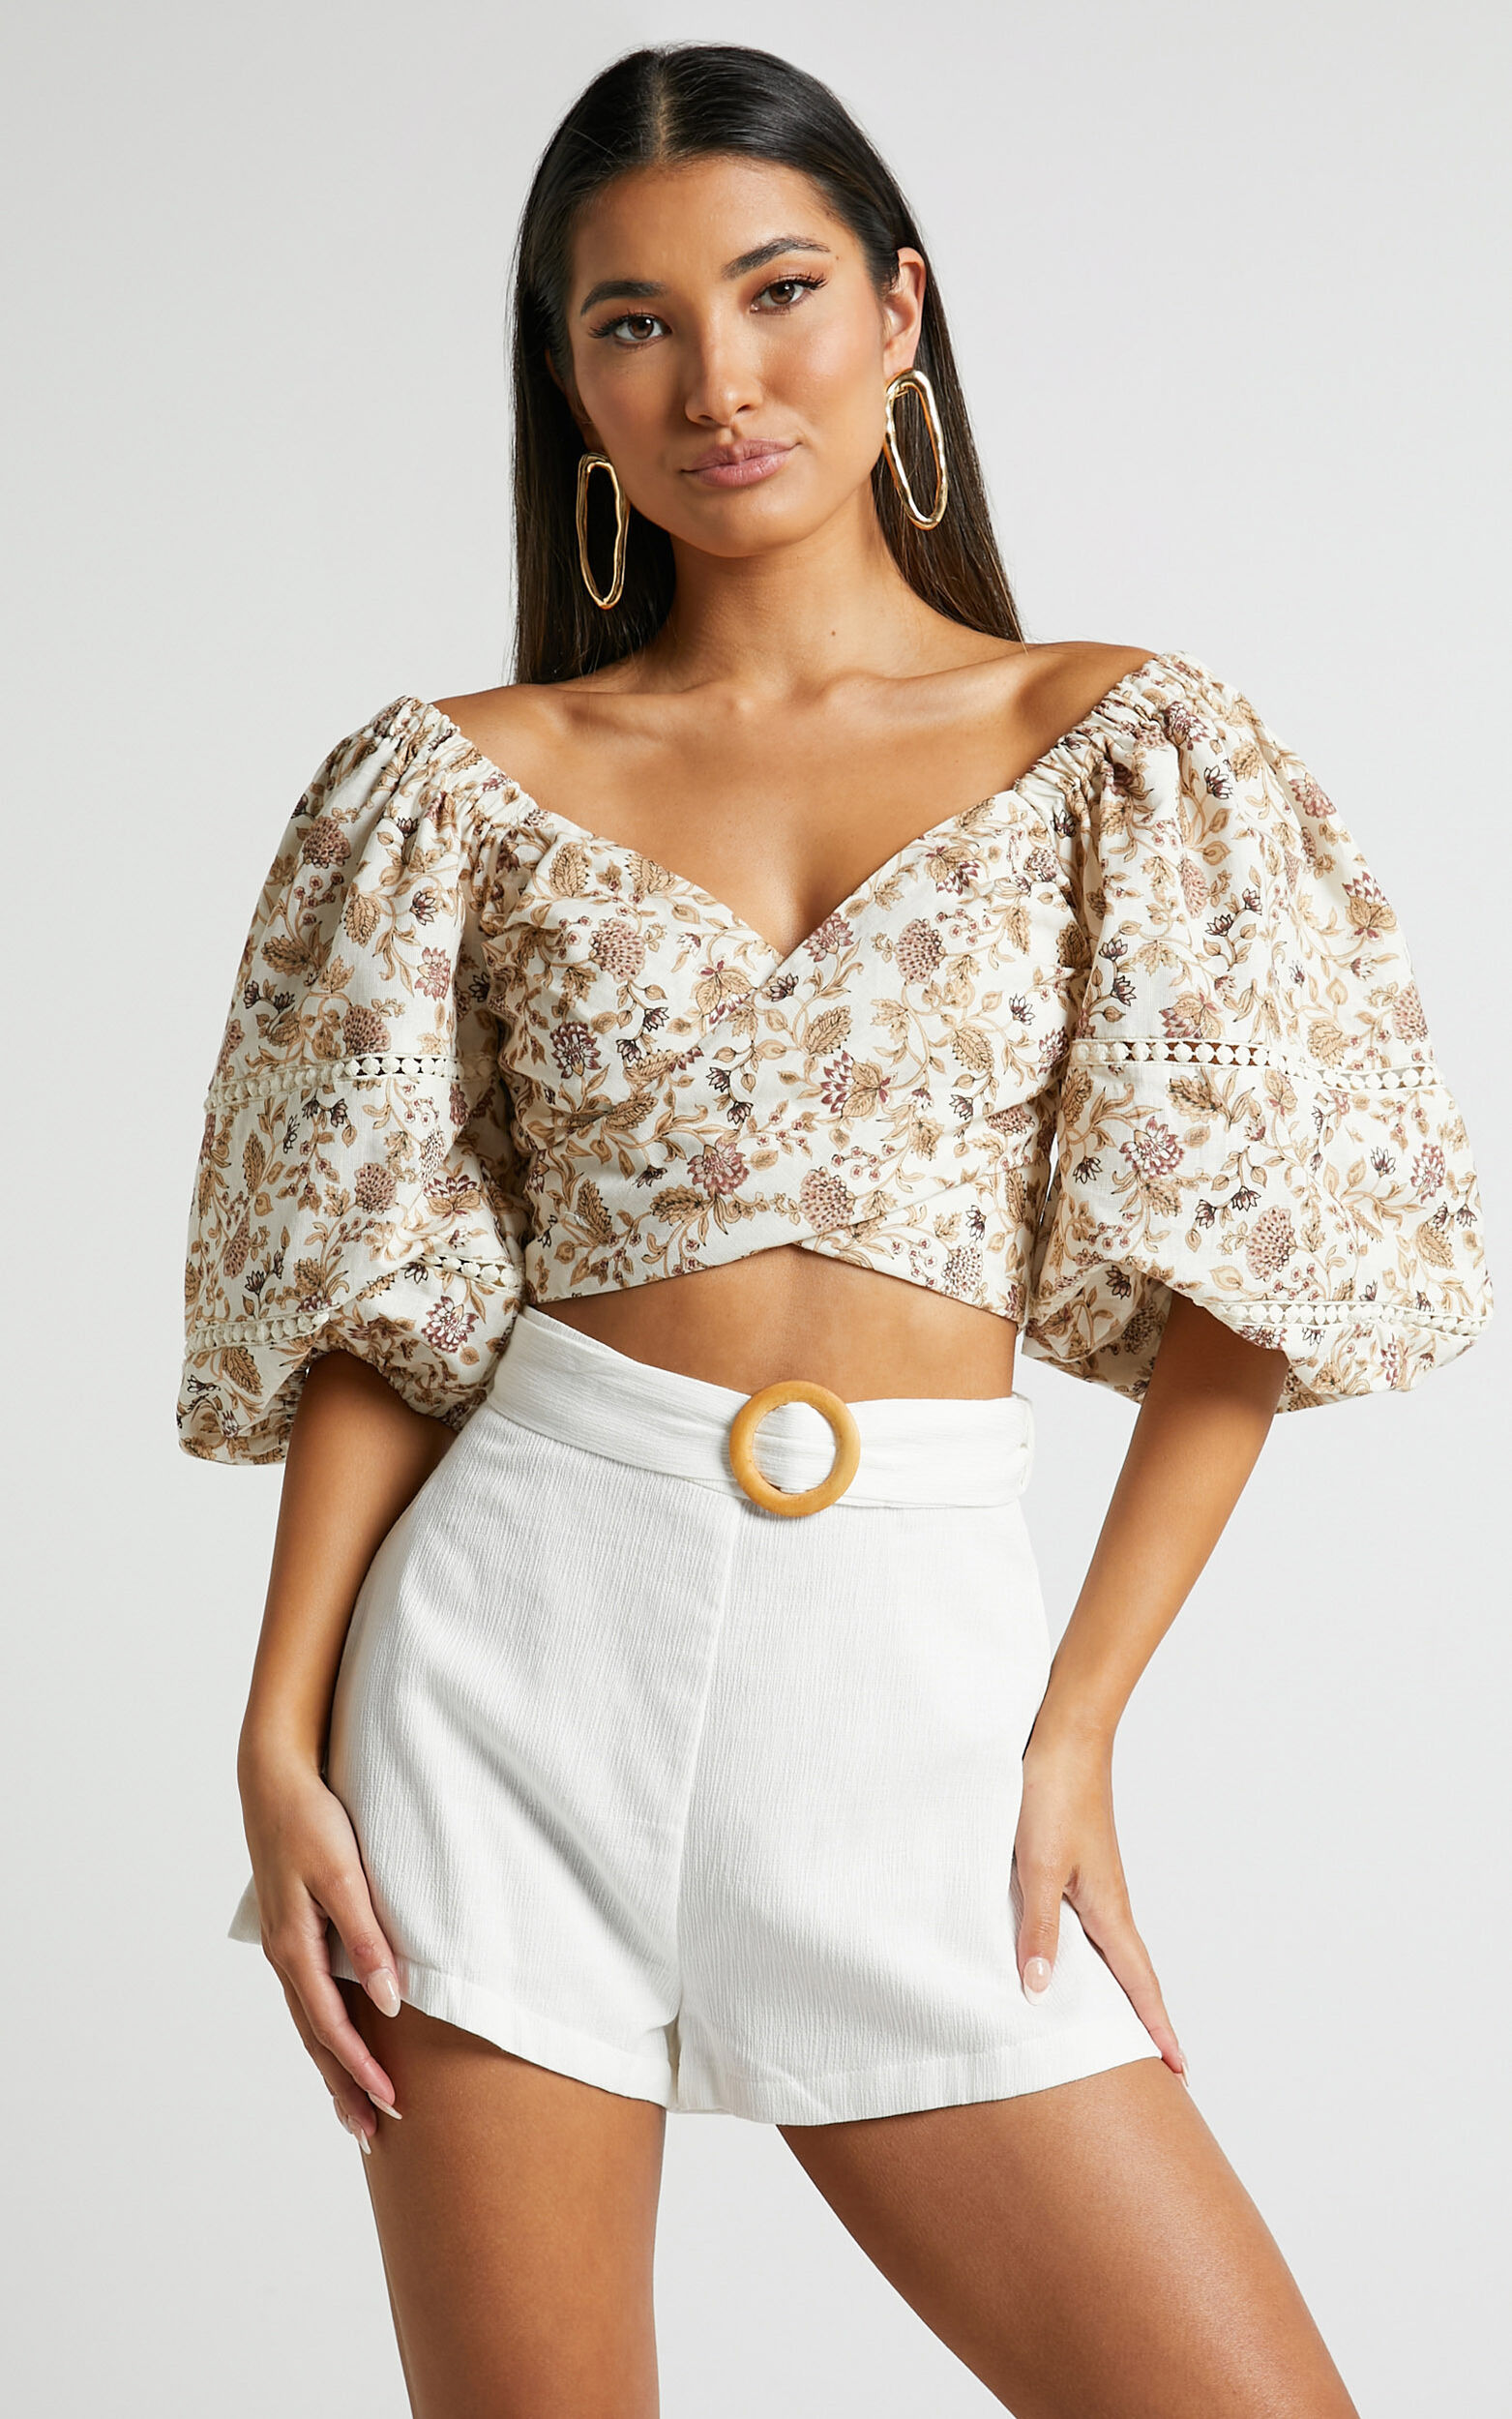 Devera Shorts - Belted High Waist Shorts in Off White